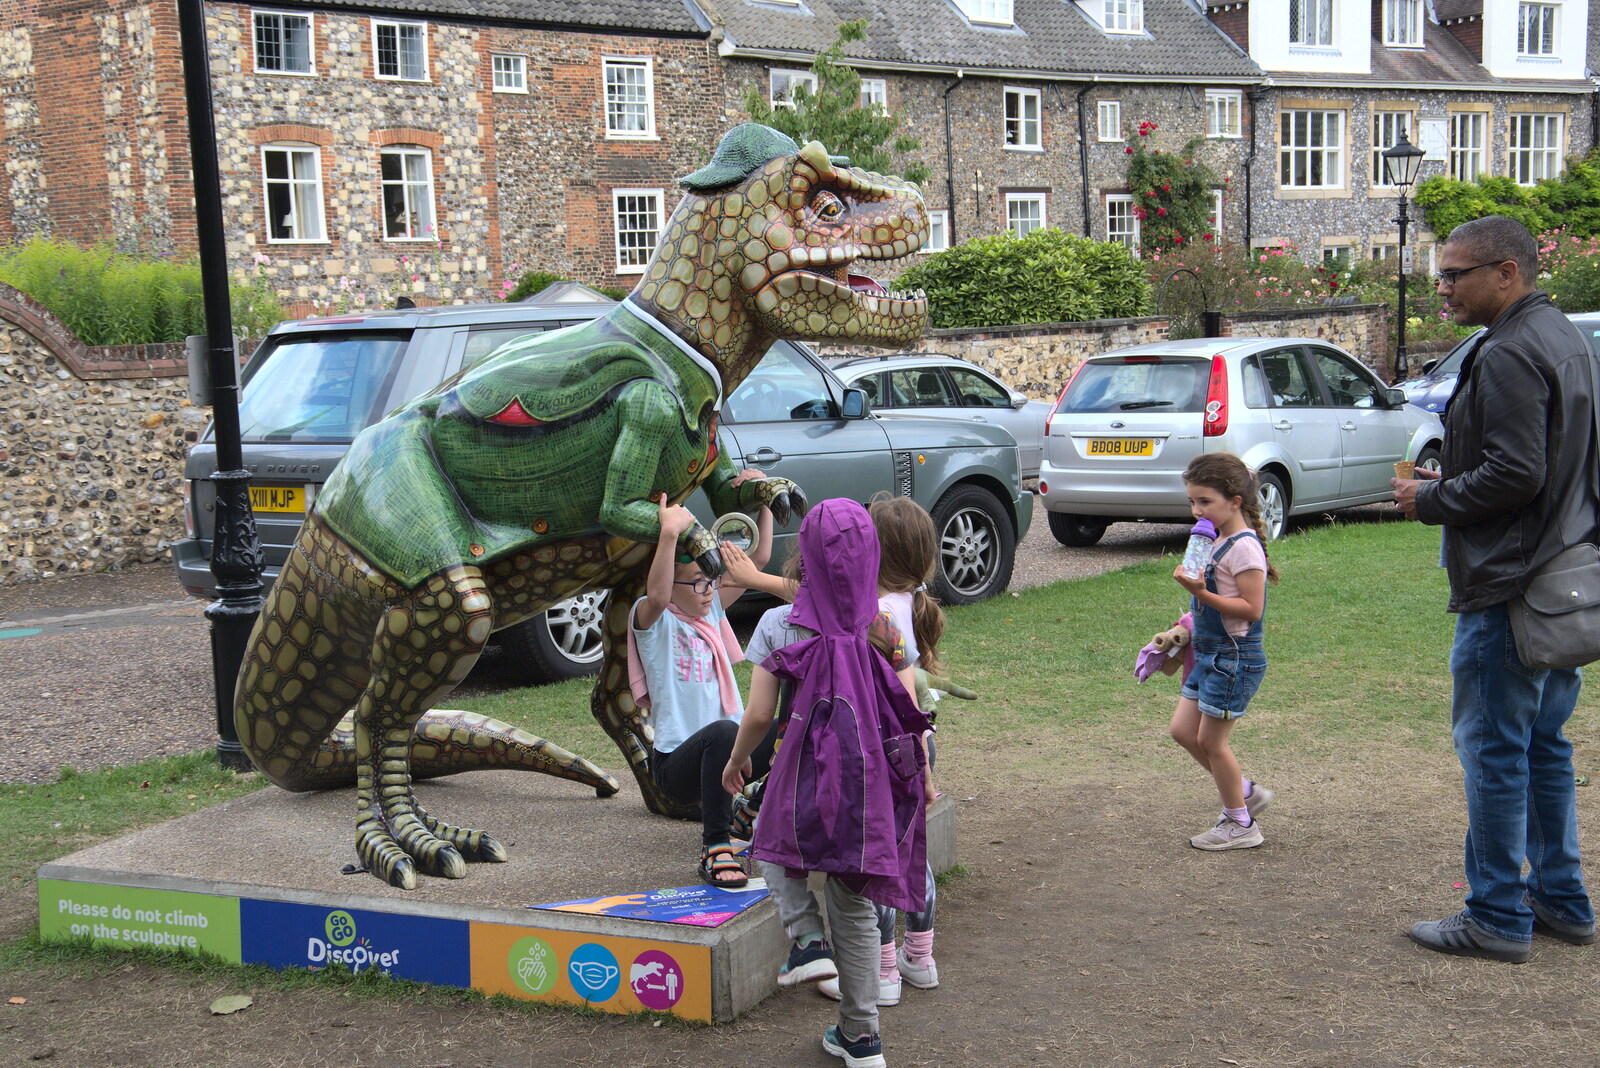 There's a Sherlock Holmes dino in the close from Dippy and the City Dinosaur Trail, Norwich, Norfolk - 19th August 2021